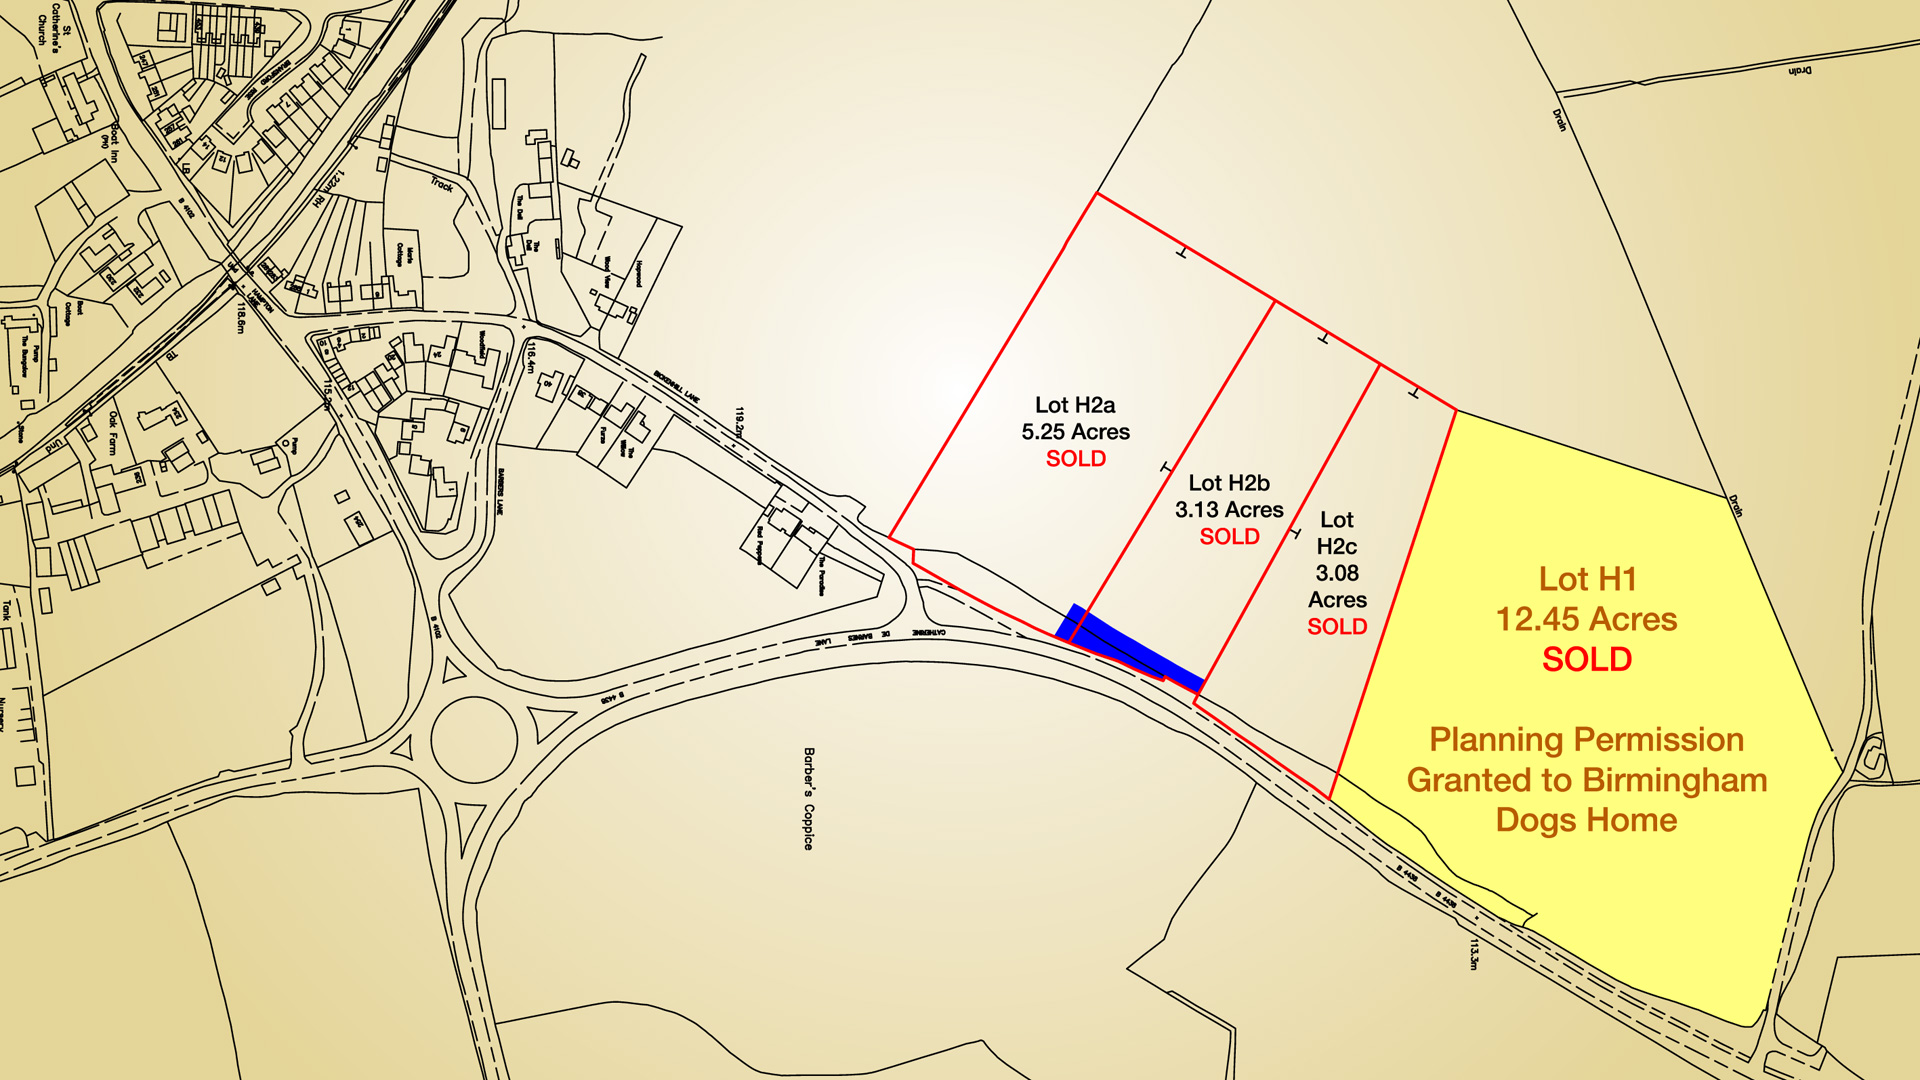 Land for sale in Solihull, Birmingham